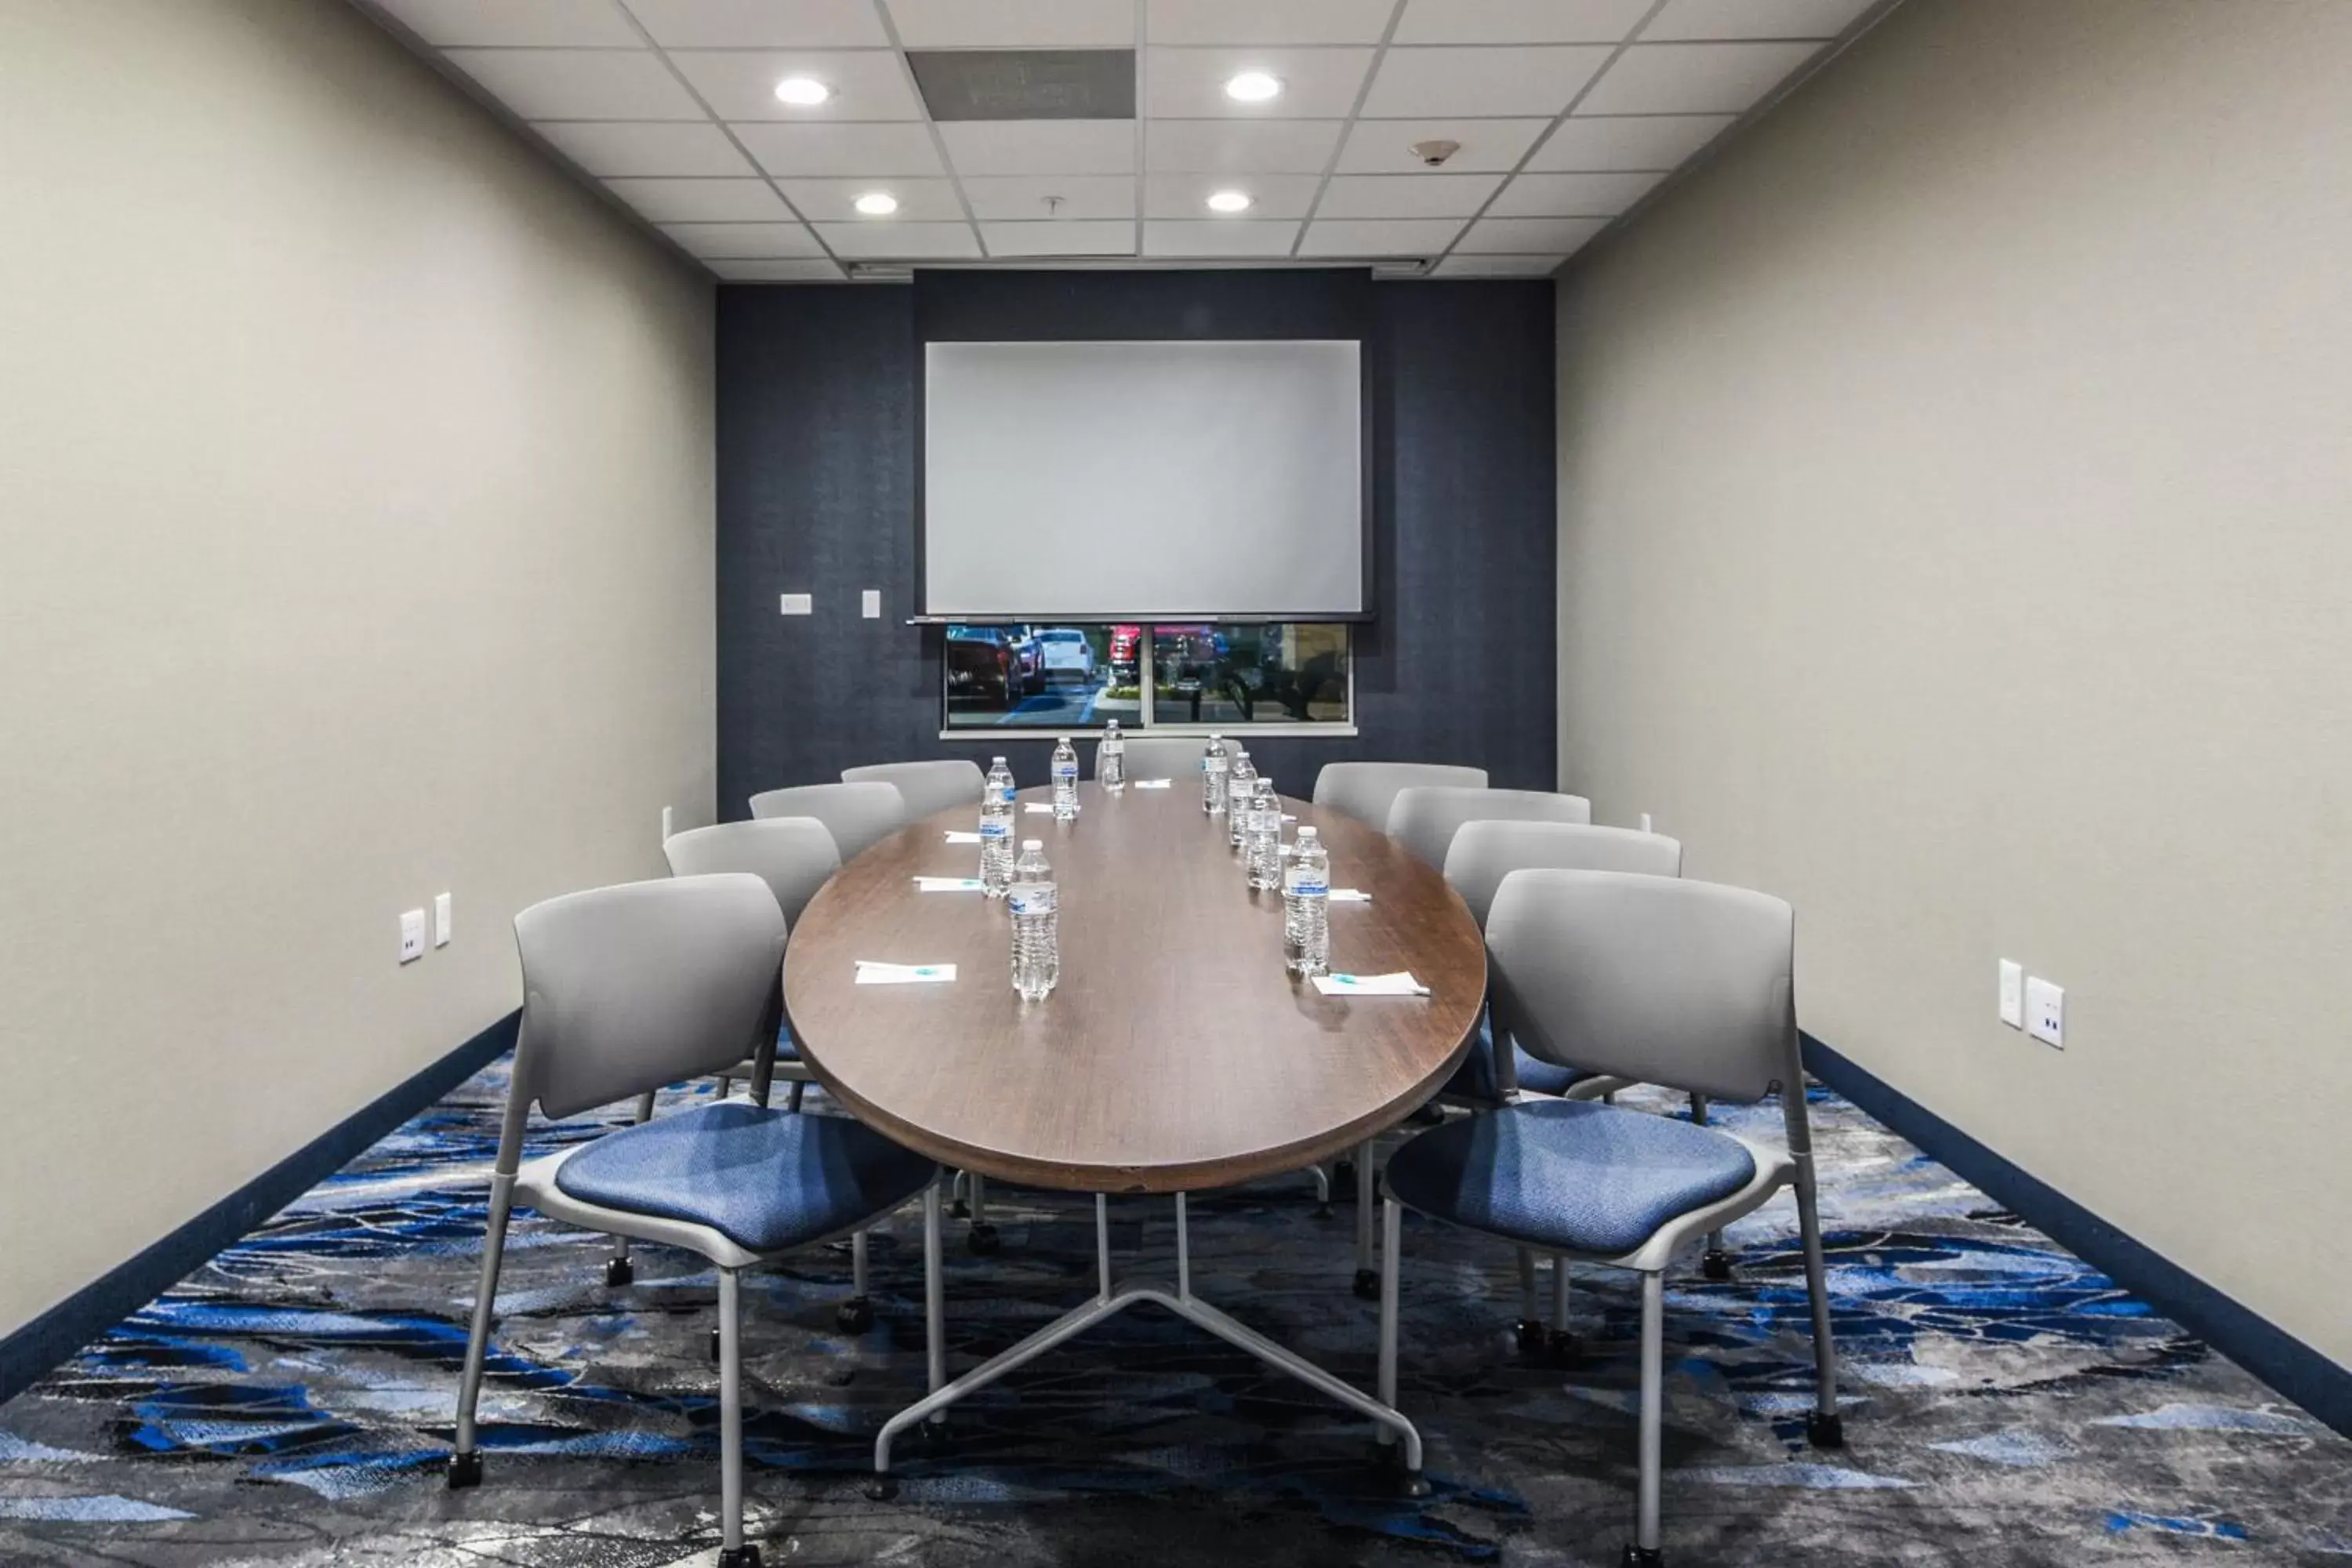 Meeting/conference room in Fairfield Inn & Suites Ontario Rancho Cucamonga